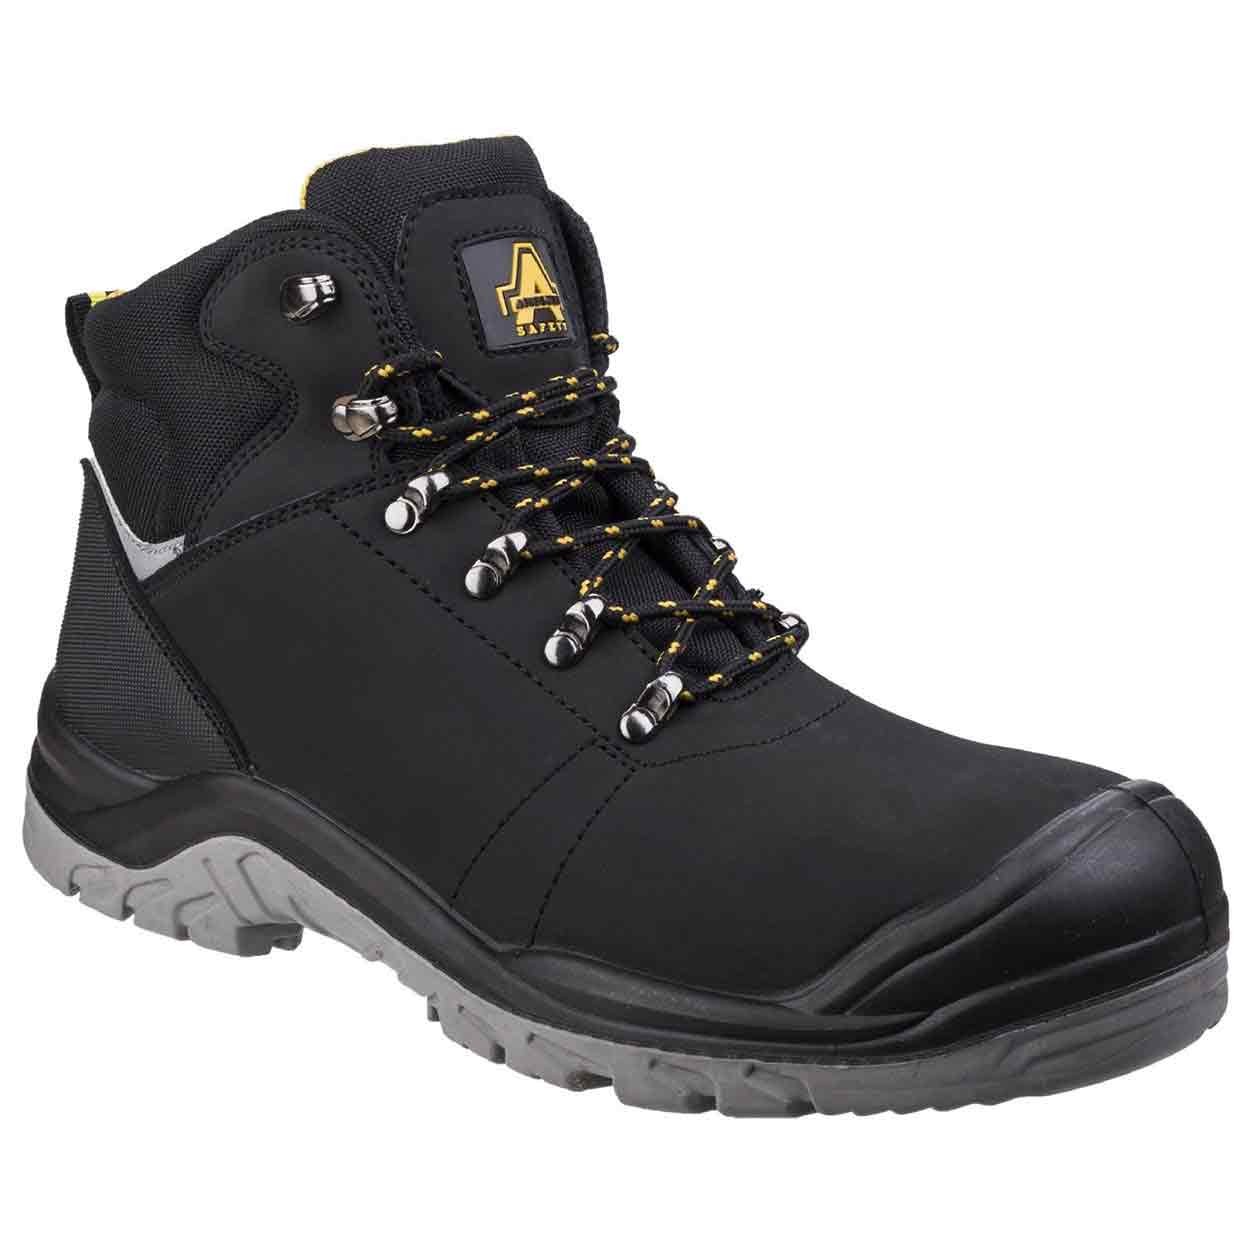 Amblers Safety AS252 - Standard Safety Boots - Mens Safety Boots & Shoes -  Safety Footwear - Best Workwear